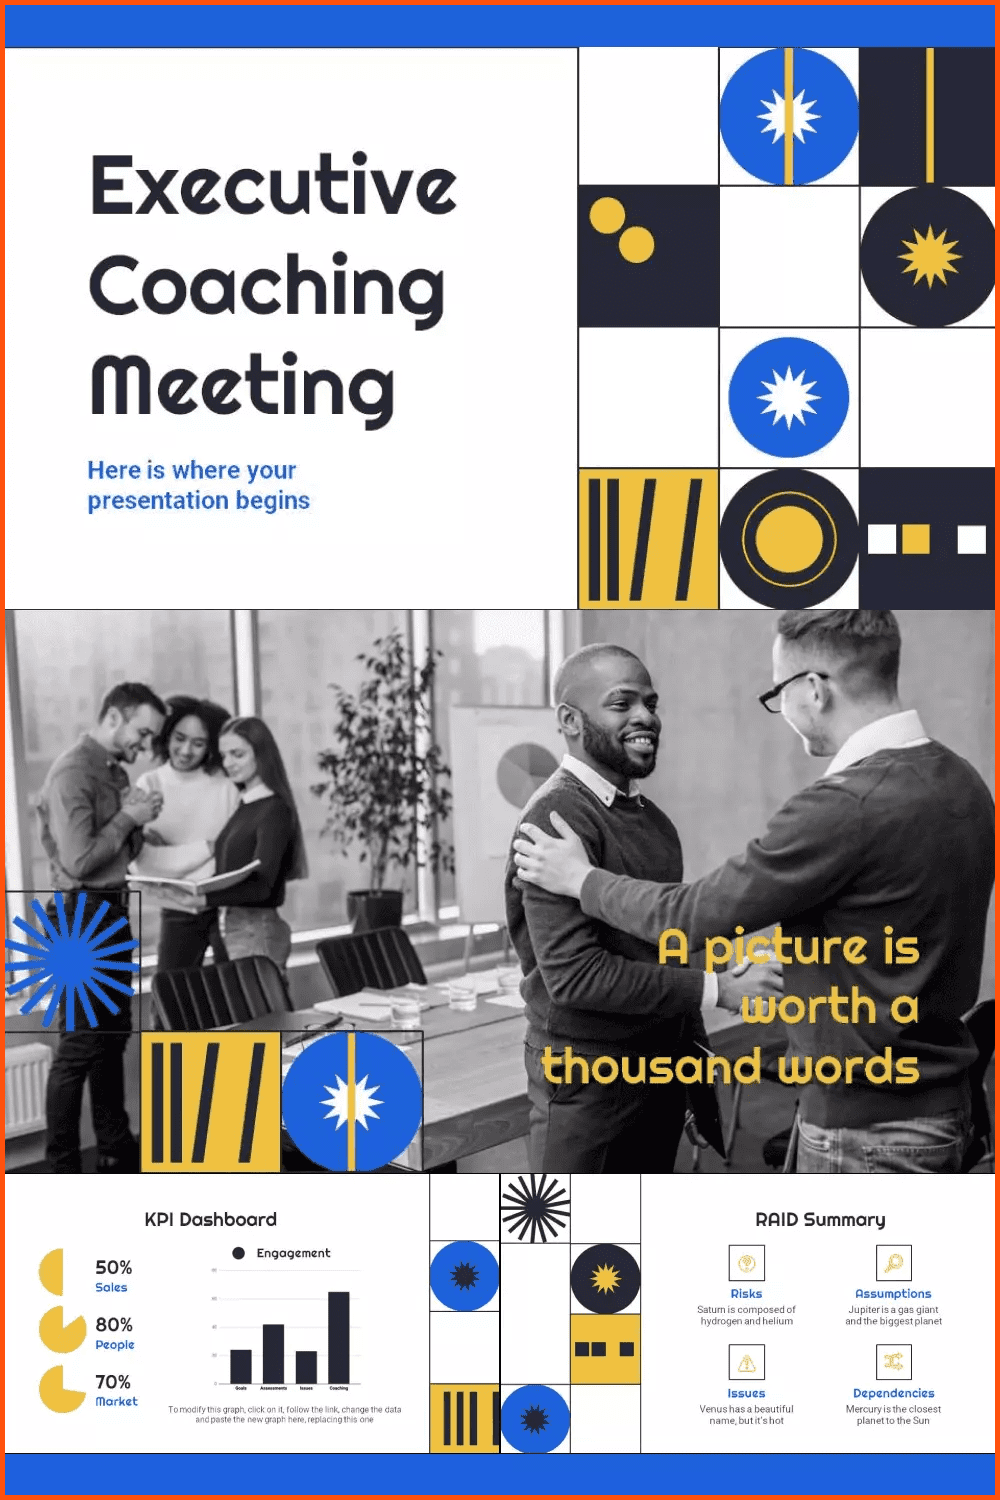 Executive Coaching Meeting Powerpoint Template.